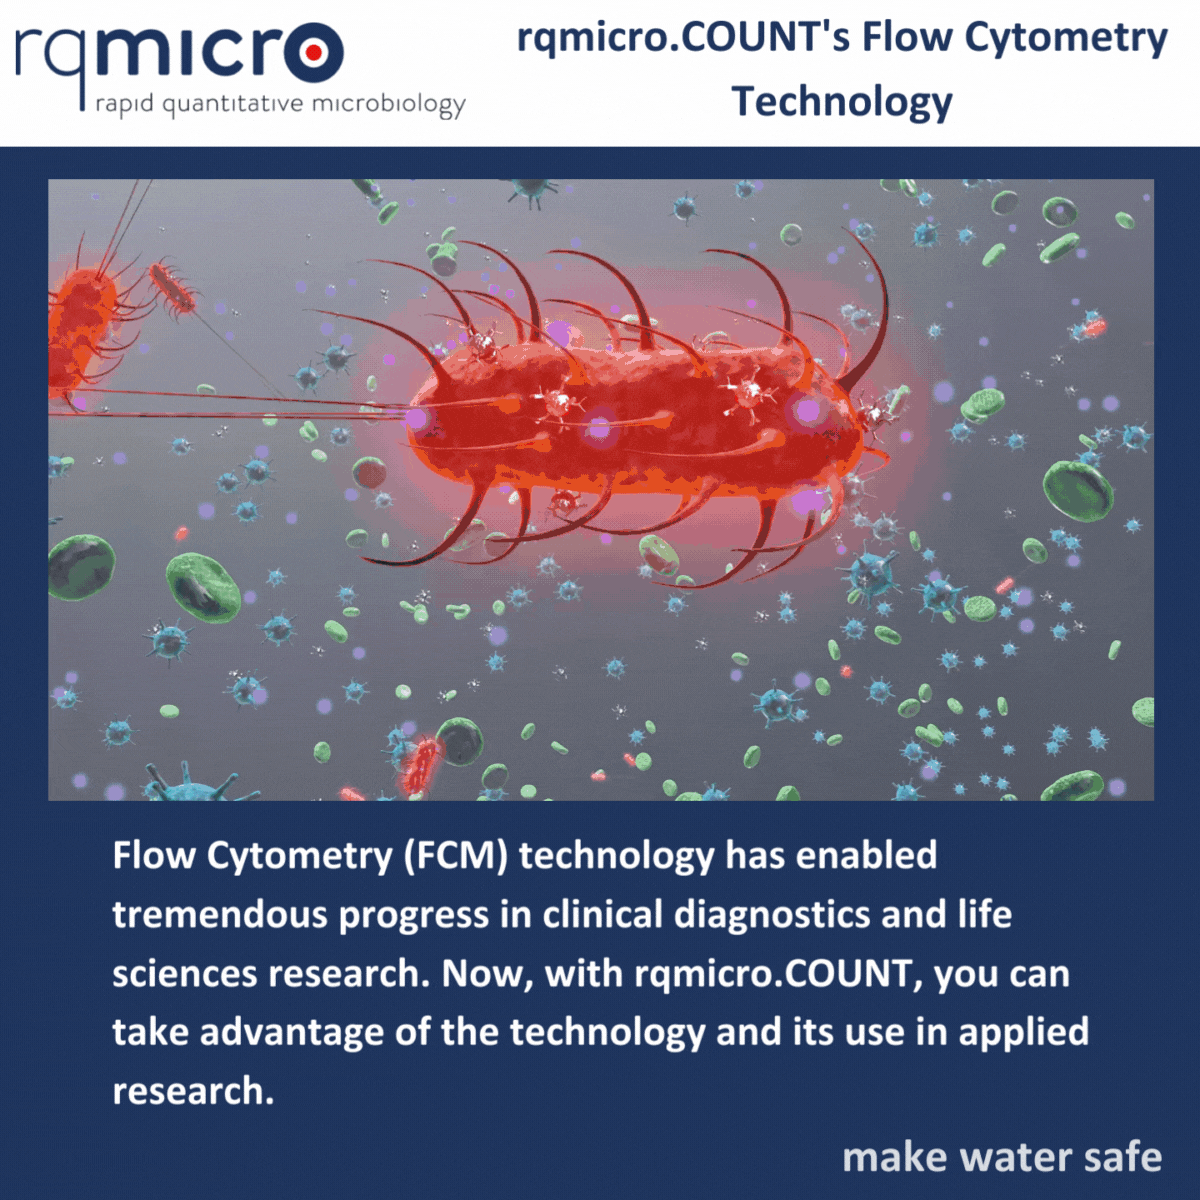 Applied Microbiology Research with an Easy-to-Use Flow Cytometer